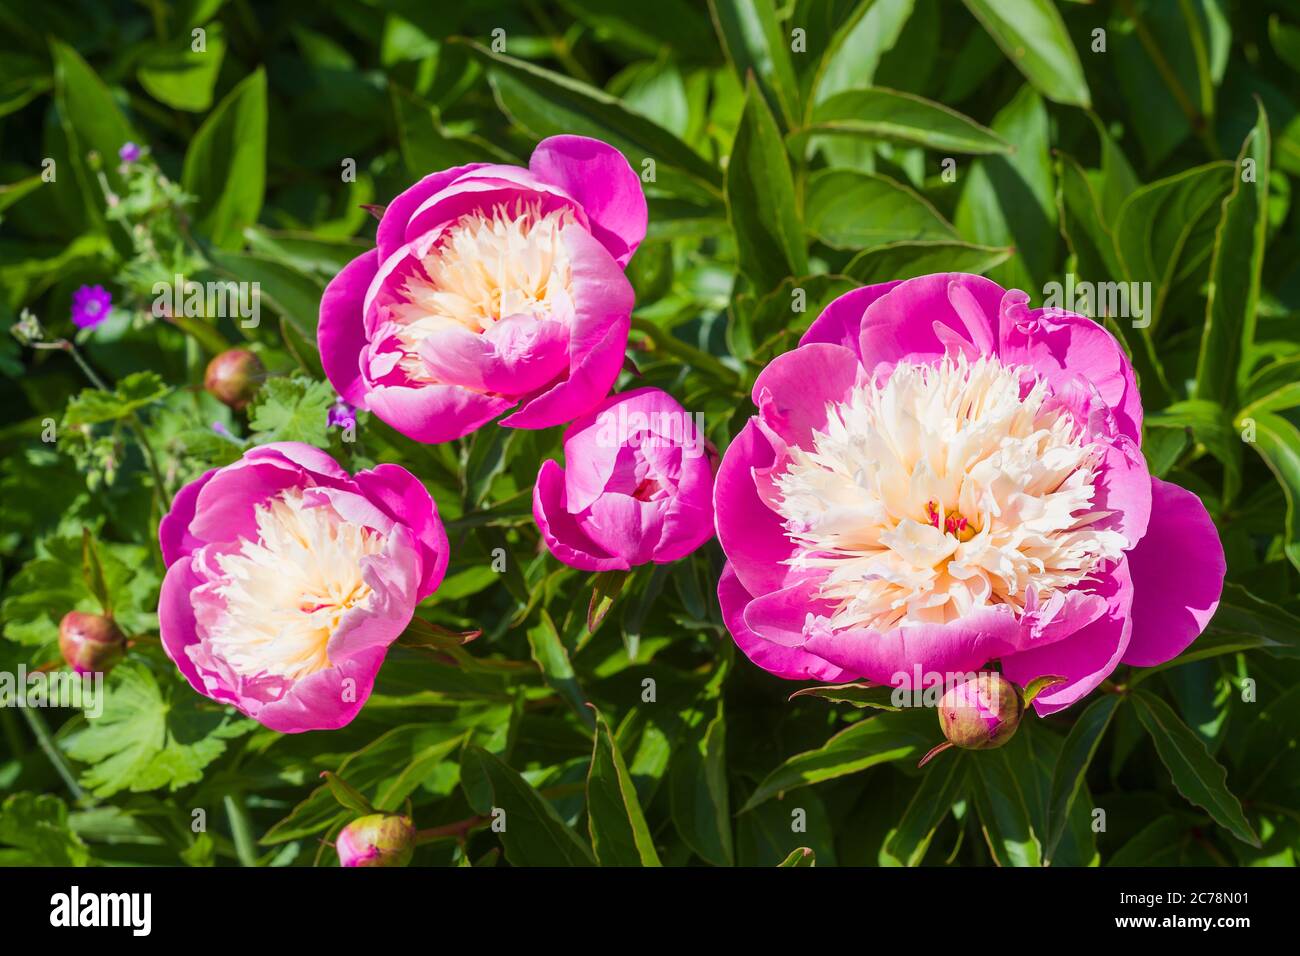 p ink and creamy whitte colours characterize these Bowl of Beauty peonies growing in an English garden in UK Stock Photo